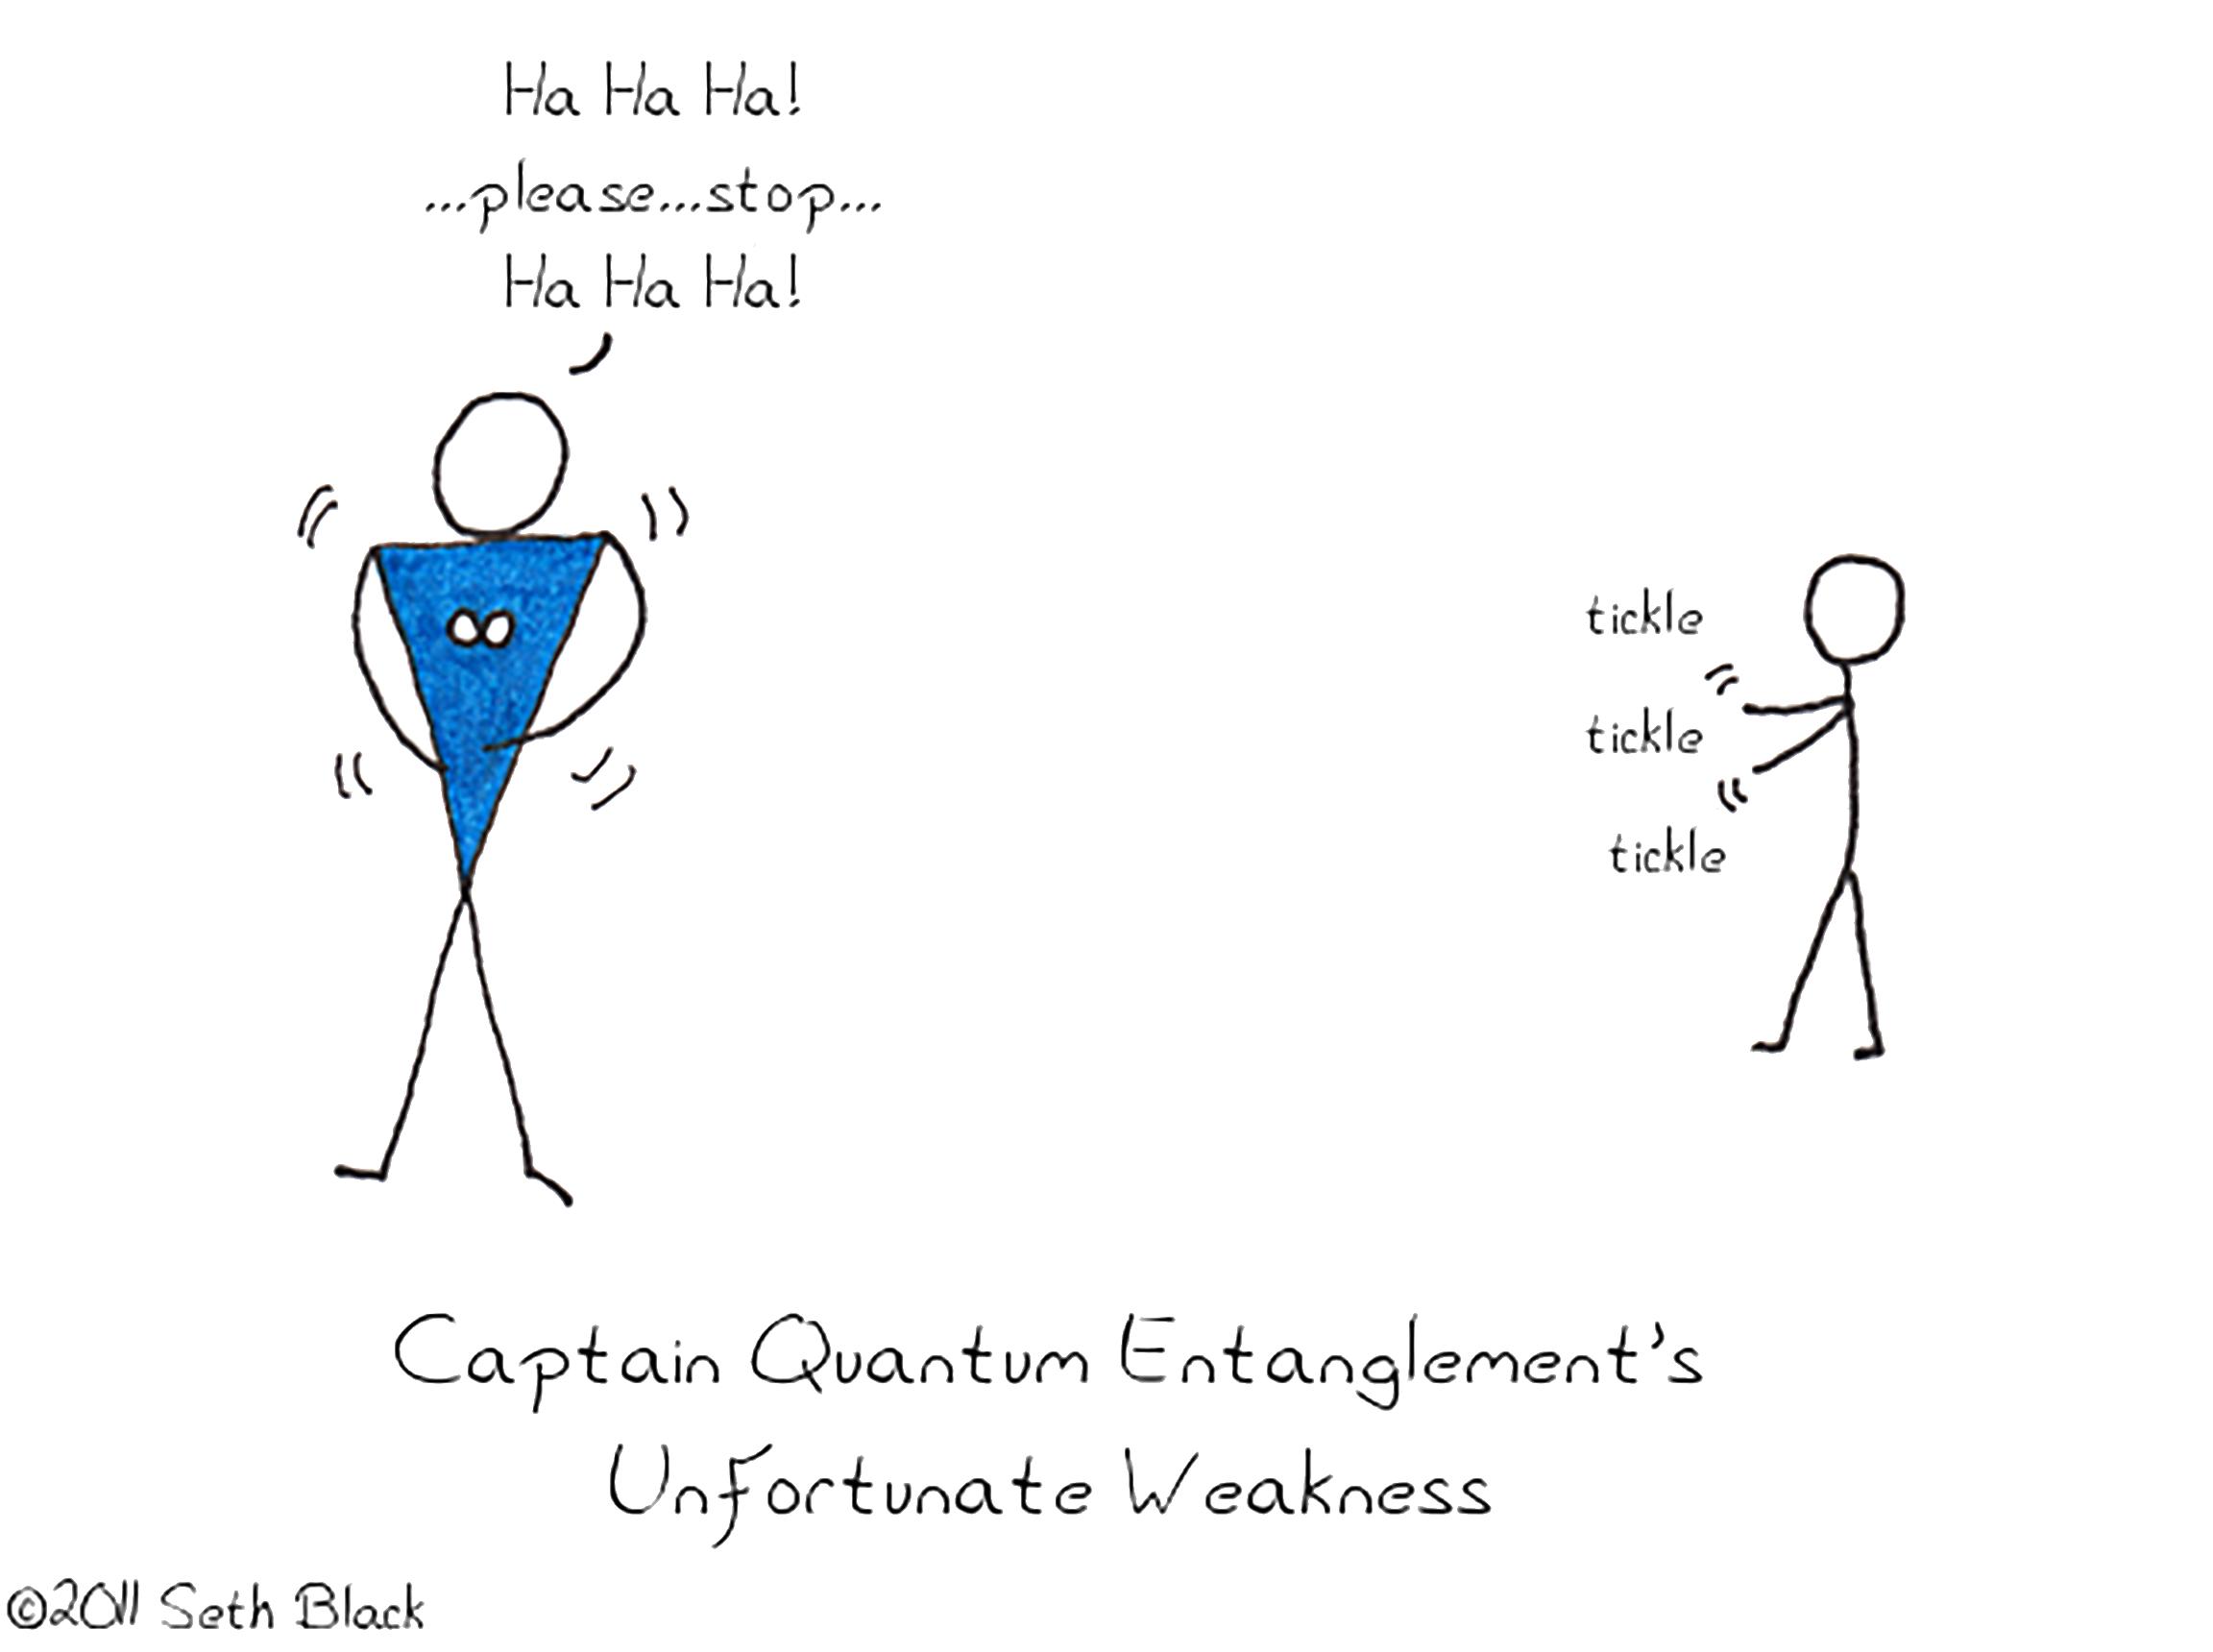 A person is able to tickle Captain Quantum Entanglement from a distance. "Captain Quantum Entanglement's unfortunate weakness."